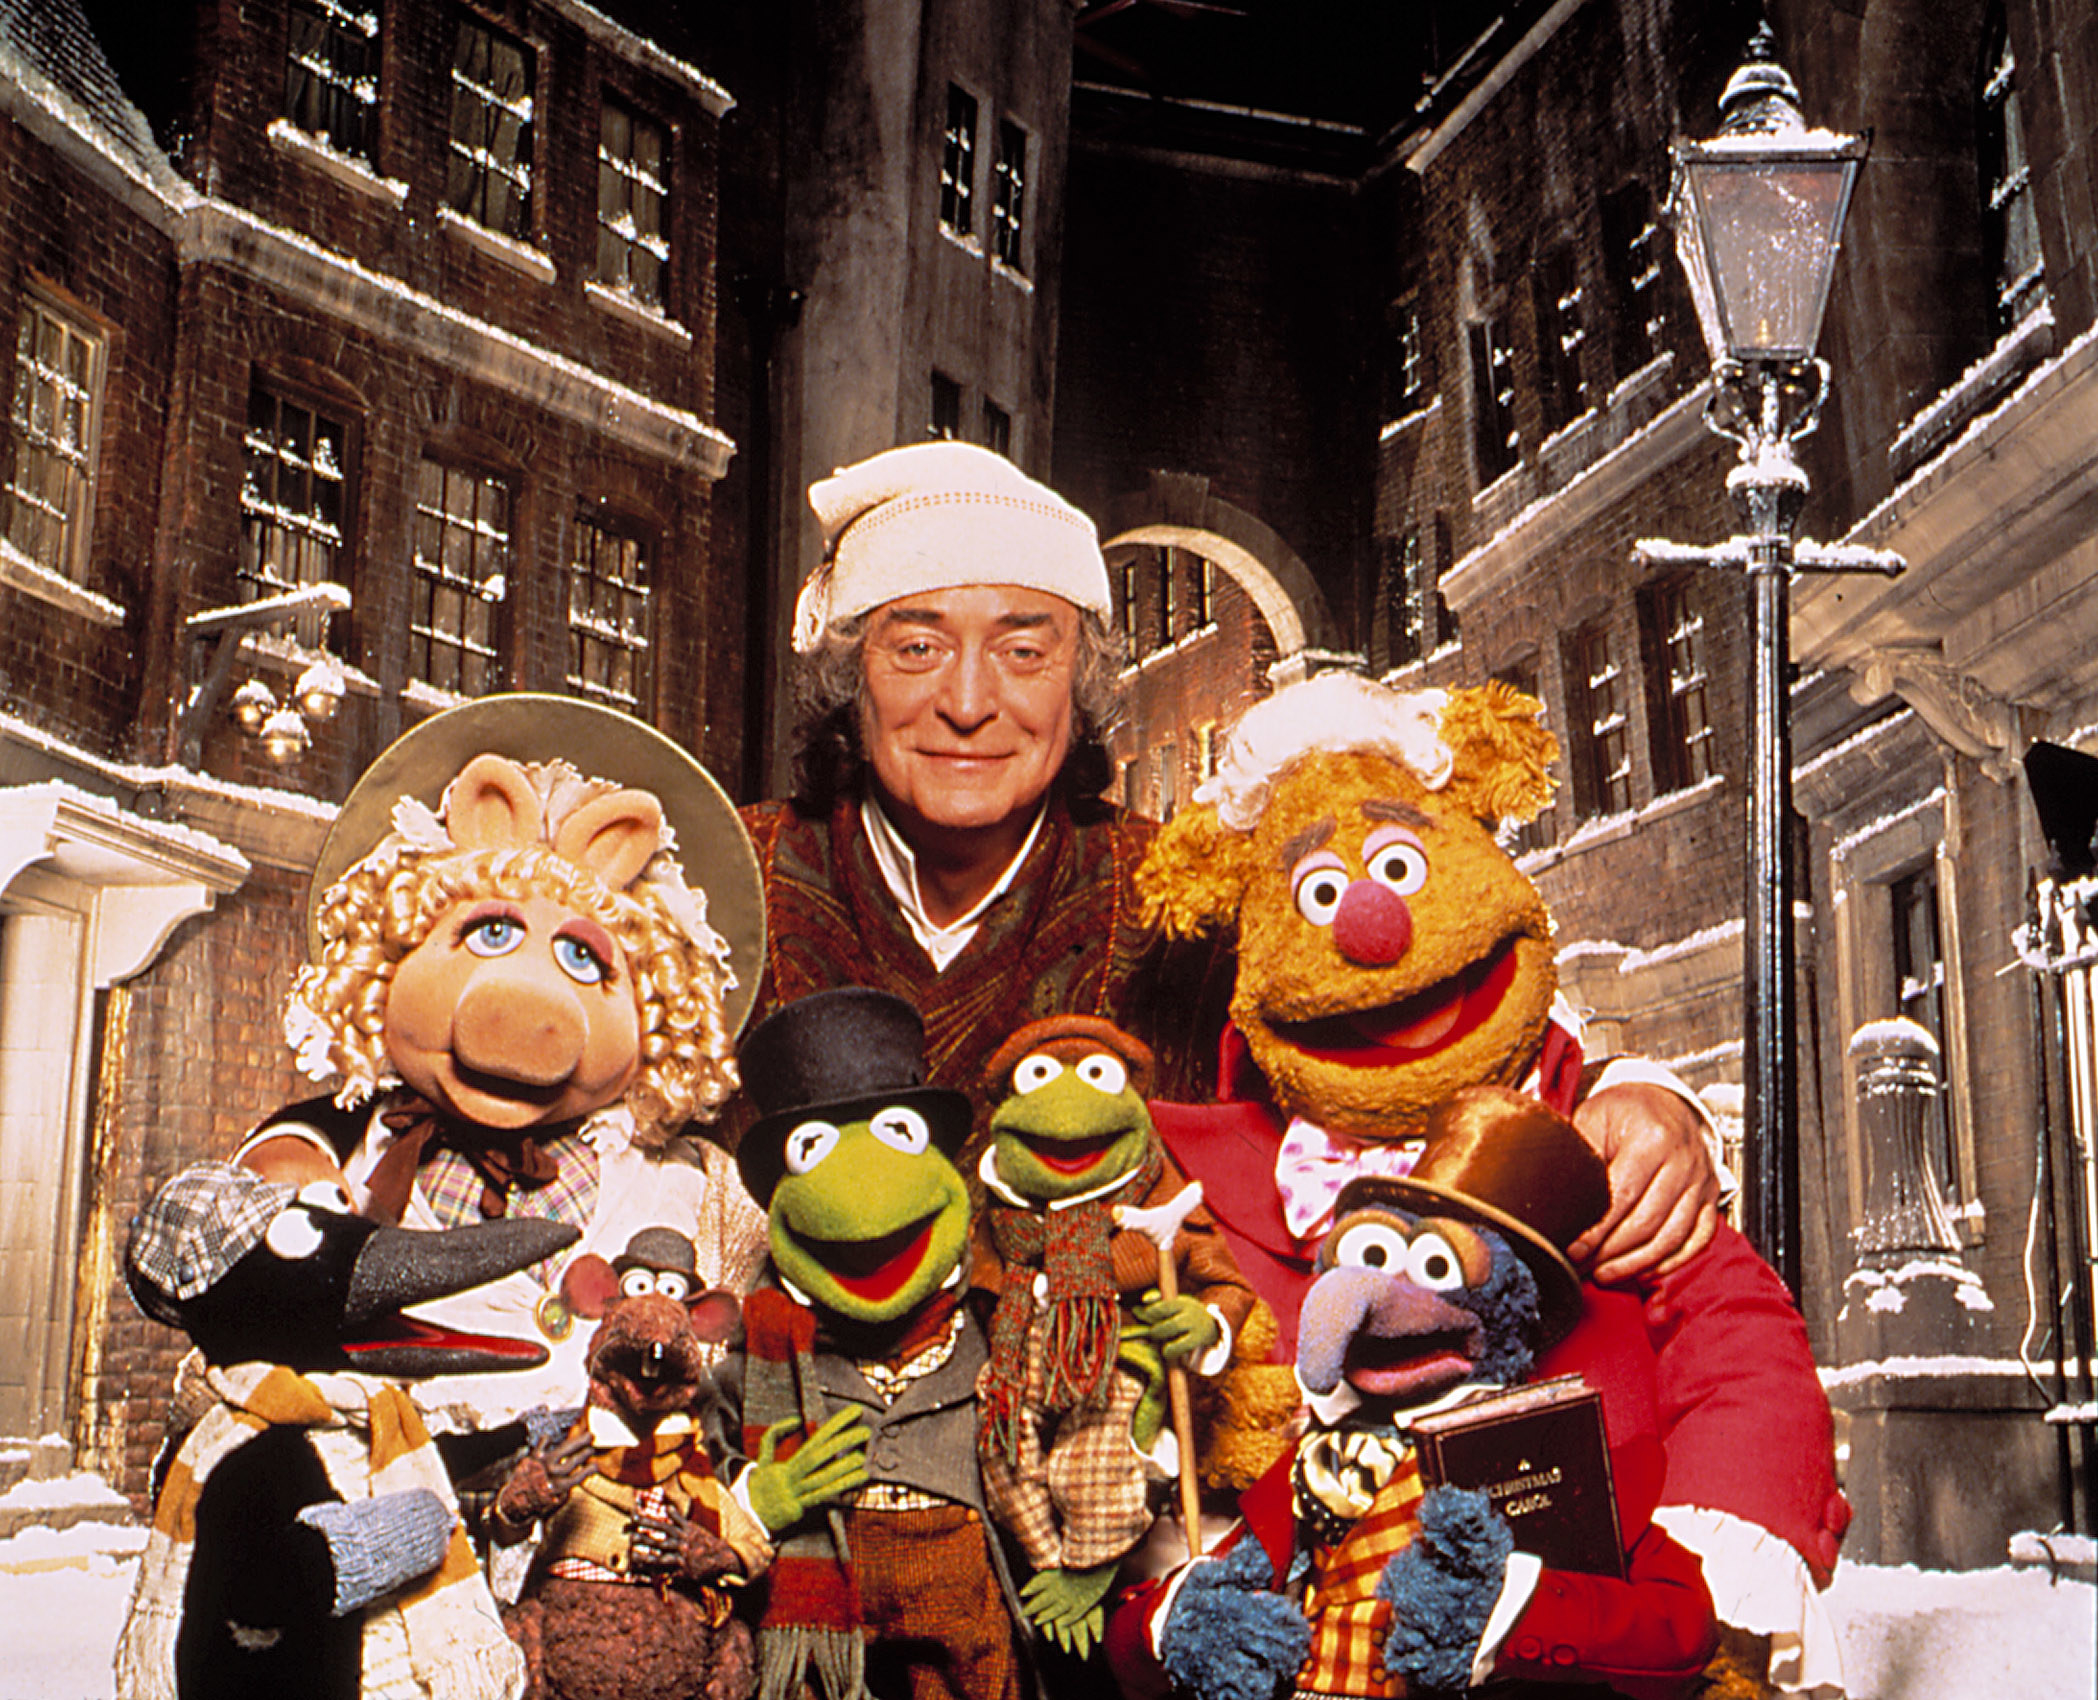 Michael Caine as Scrooge with a group of muppets